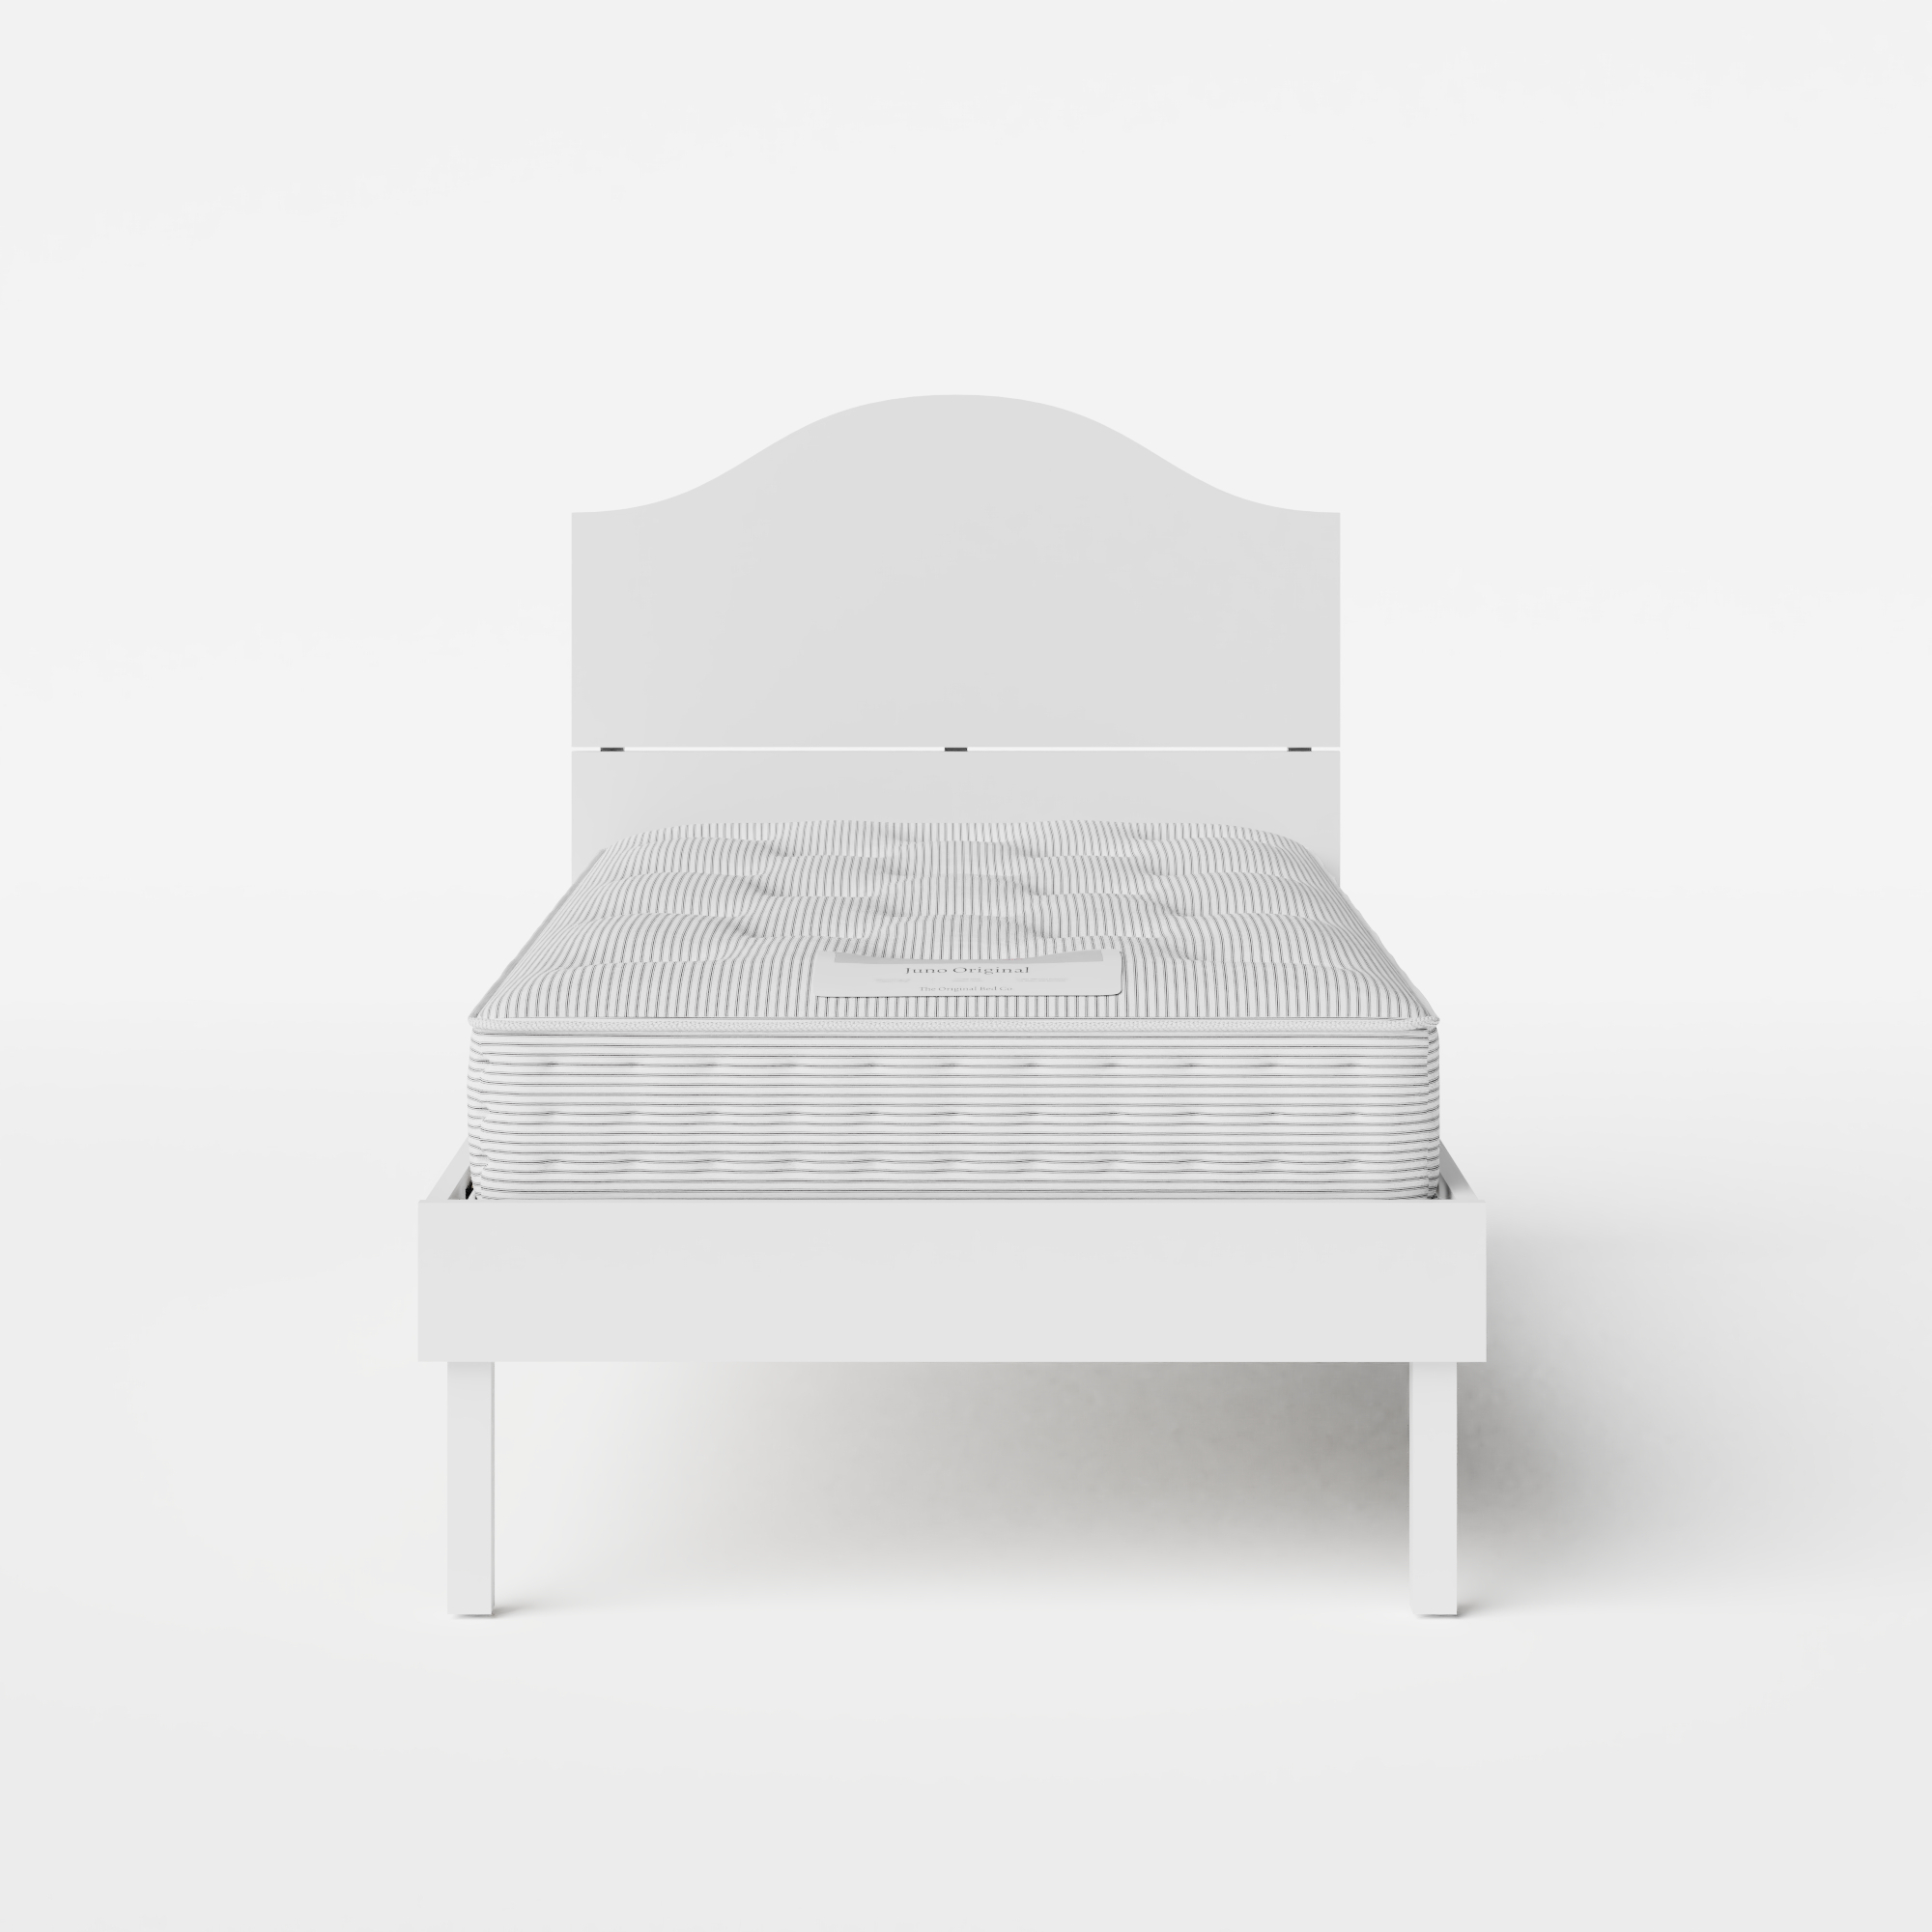 Yoshida Painted single painted wood bed in white with Juno mattress